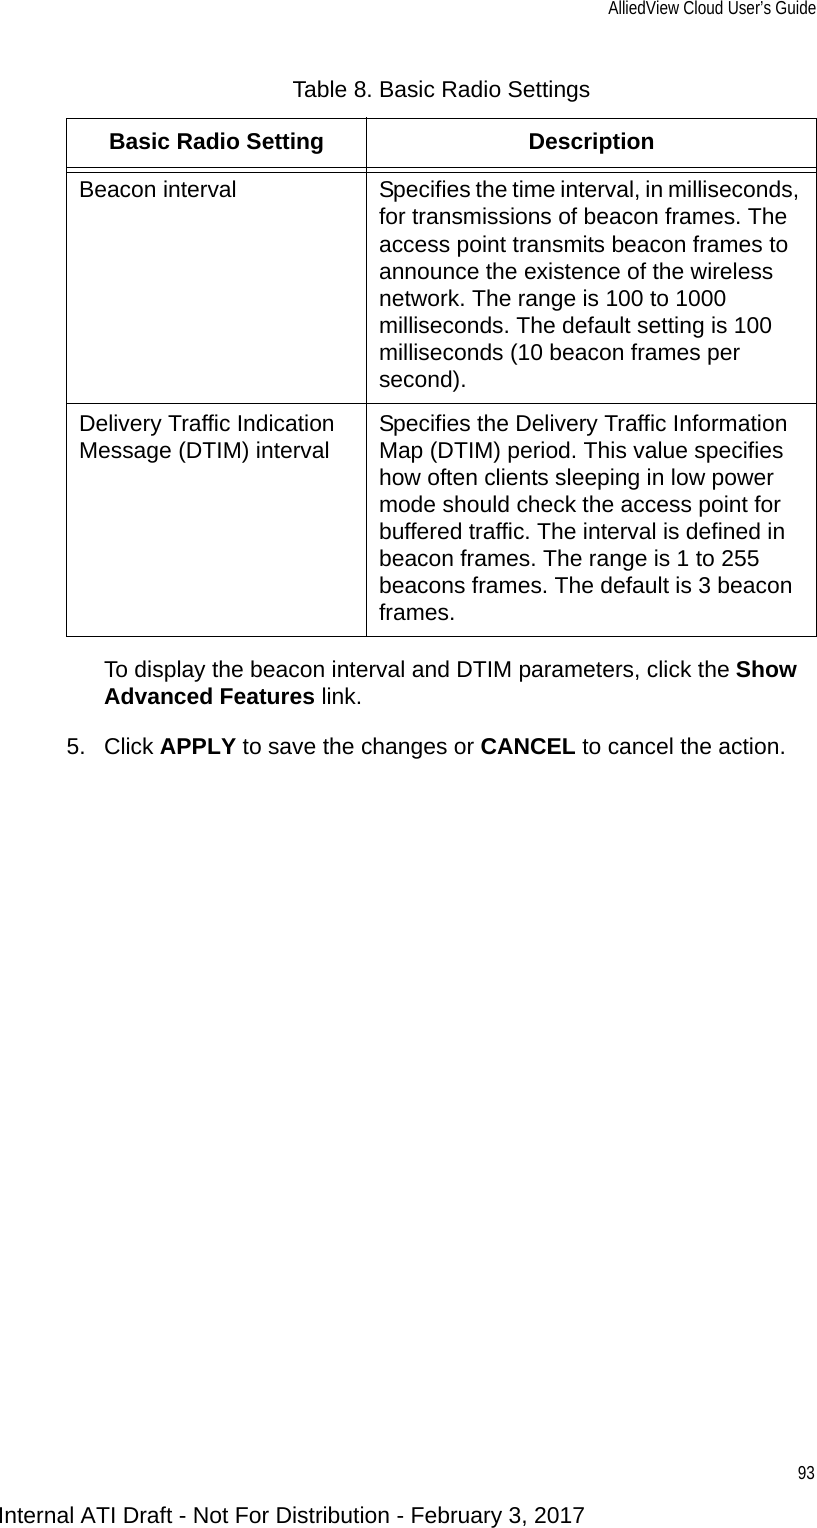 AlliedView Cloud User’s Guide93To display the beacon interval and DTIM parameters, click the Show Advanced Features link.5. Click APPLY to save the changes or CANCEL to cancel the action.Beacon interval Specifies the time interval, in milliseconds, for transmissions of beacon frames. The access point transmits beacon frames to announce the existence of the wireless network. The range is 100 to 1000 milliseconds. The default setting is 100 milliseconds (10 beacon frames per second).Delivery Traffic Indication Message (DTIM) interval Specifies the Delivery Traffic Information Map (DTIM) period. This value specifies how often clients sleeping in low power mode should check the access point for buffered traffic. The interval is defined in beacon frames. The range is 1 to 255 beacons frames. The default is 3 beacon frames.Table 8. Basic Radio SettingsBasic Radio Setting DescriptionInternal ATI Draft - Not For Distribution - February 3, 2017